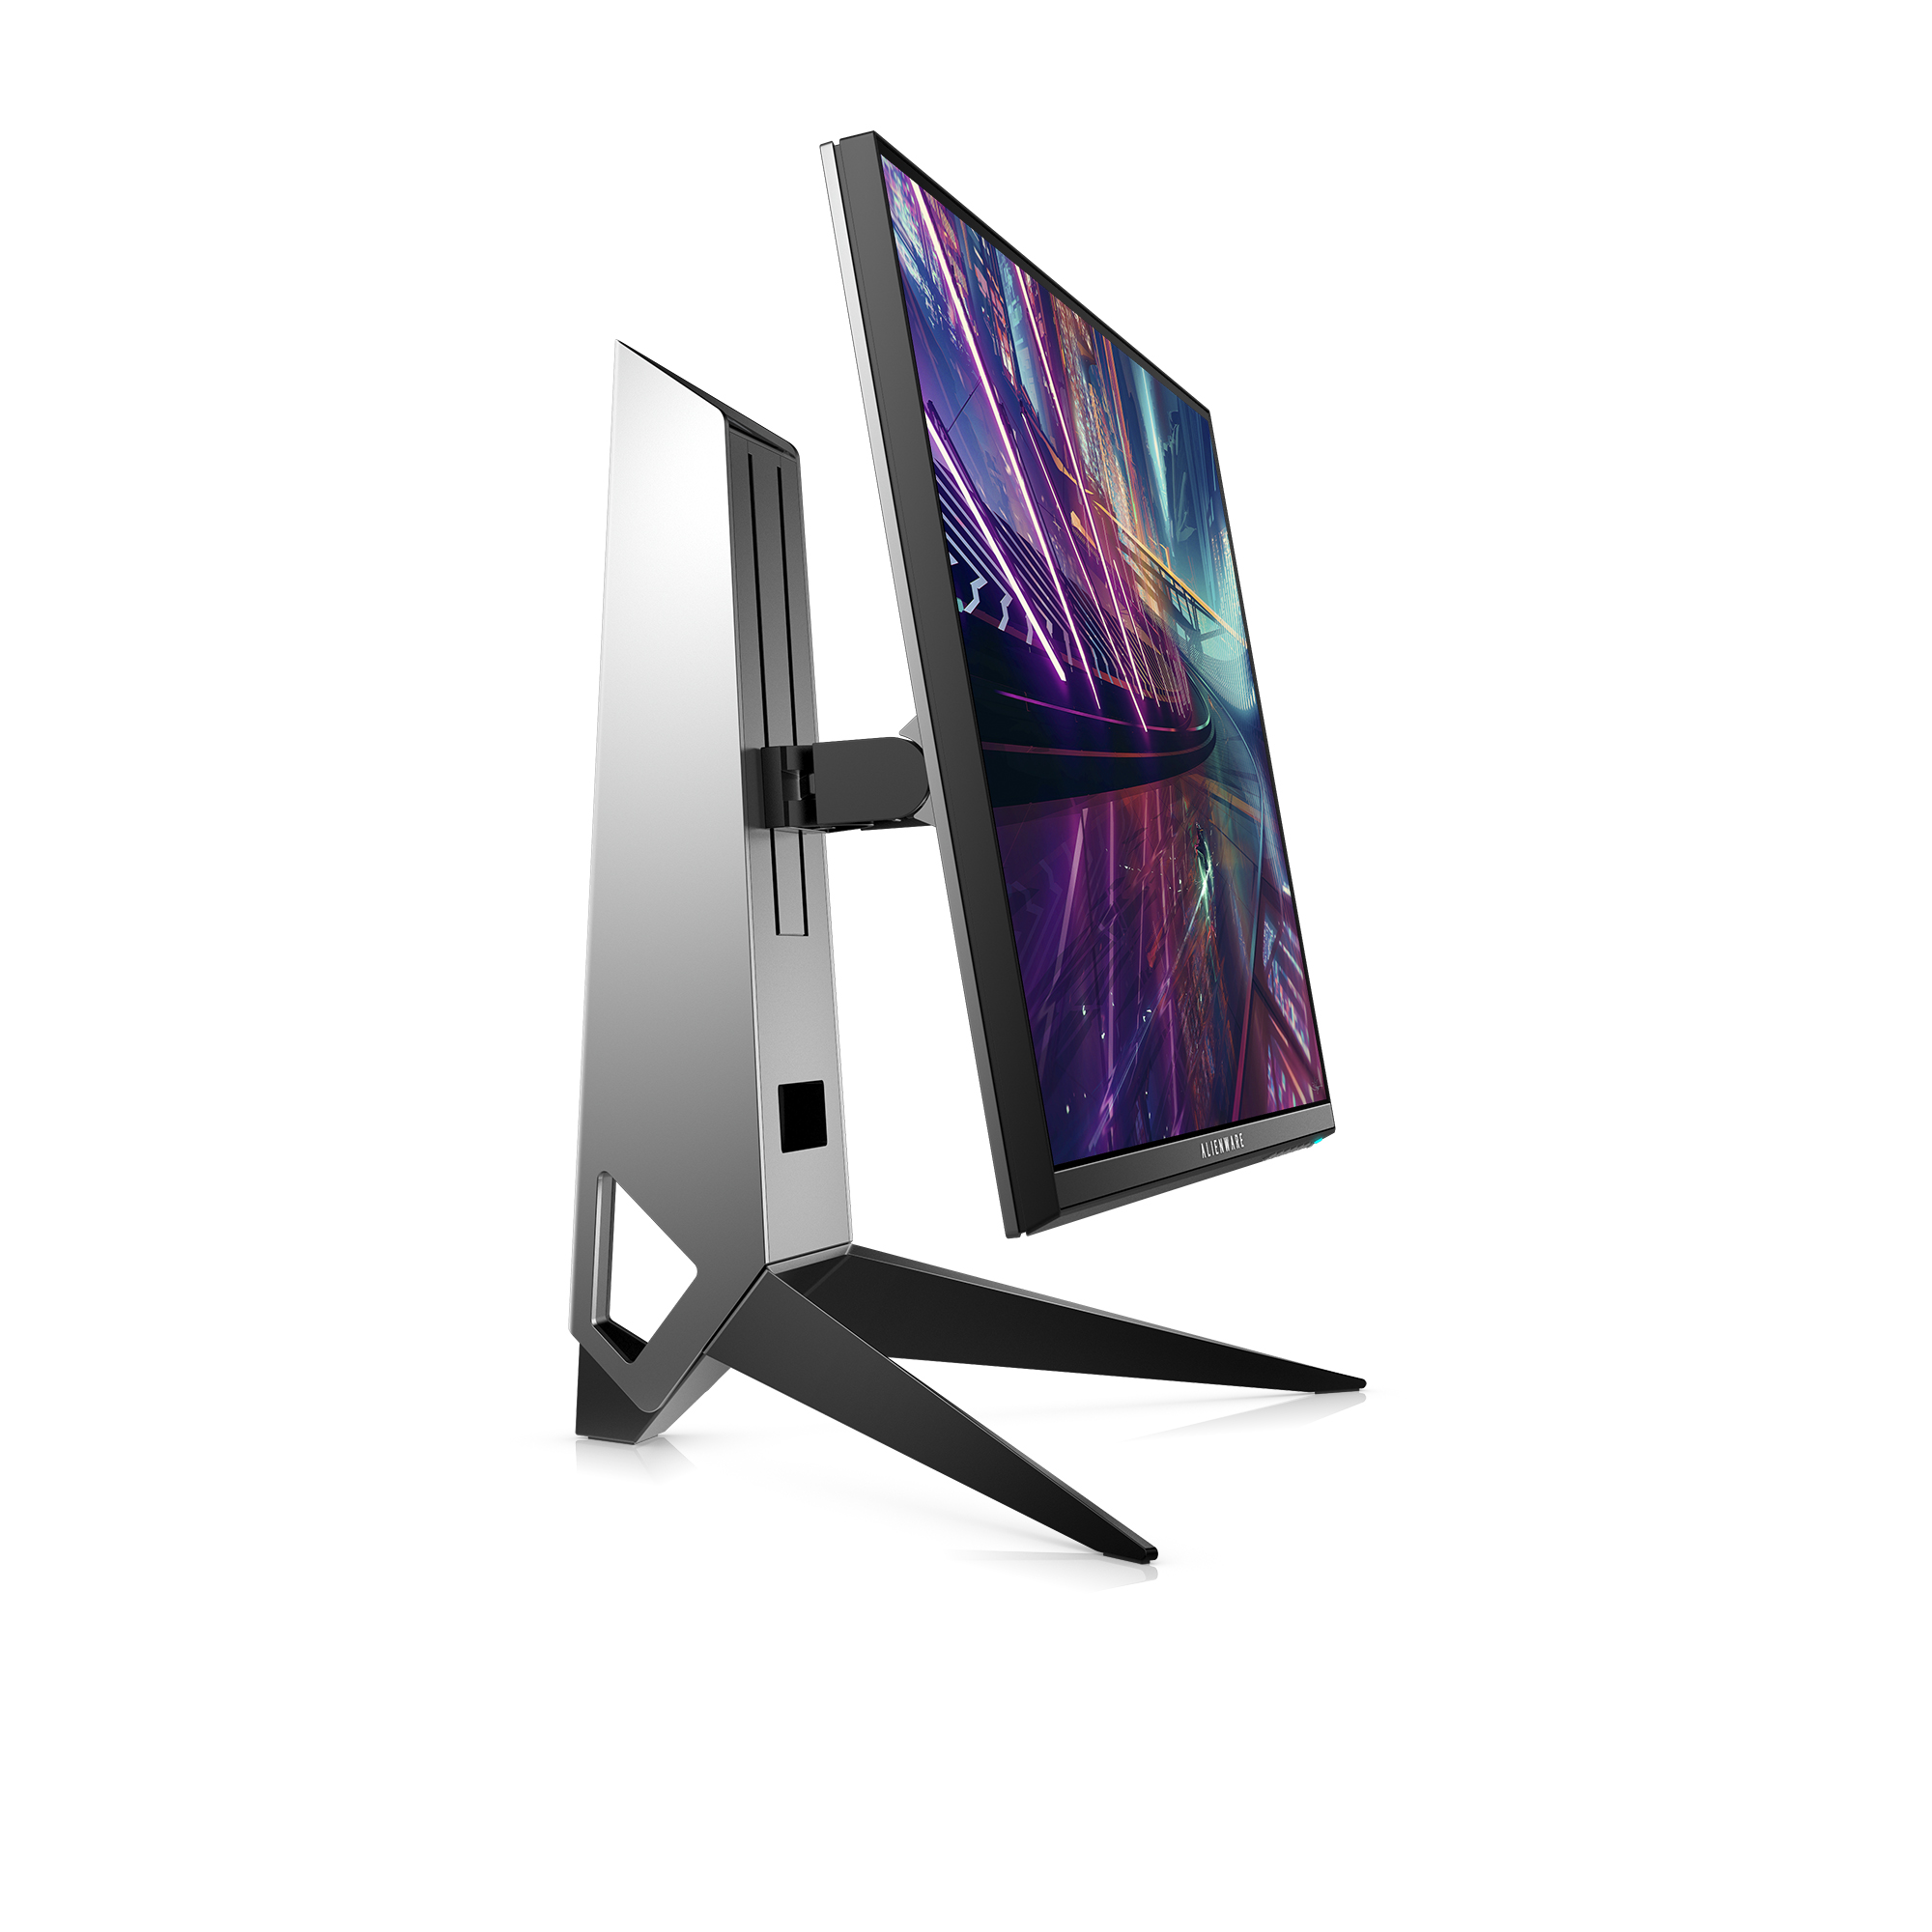 Alienware 25" 1920x1080 HDMI DP USB 3.0 240hz 1ms NVIDIA G-SYNC HD LCD Gaming monitor - AW2518H - image 5 of 11